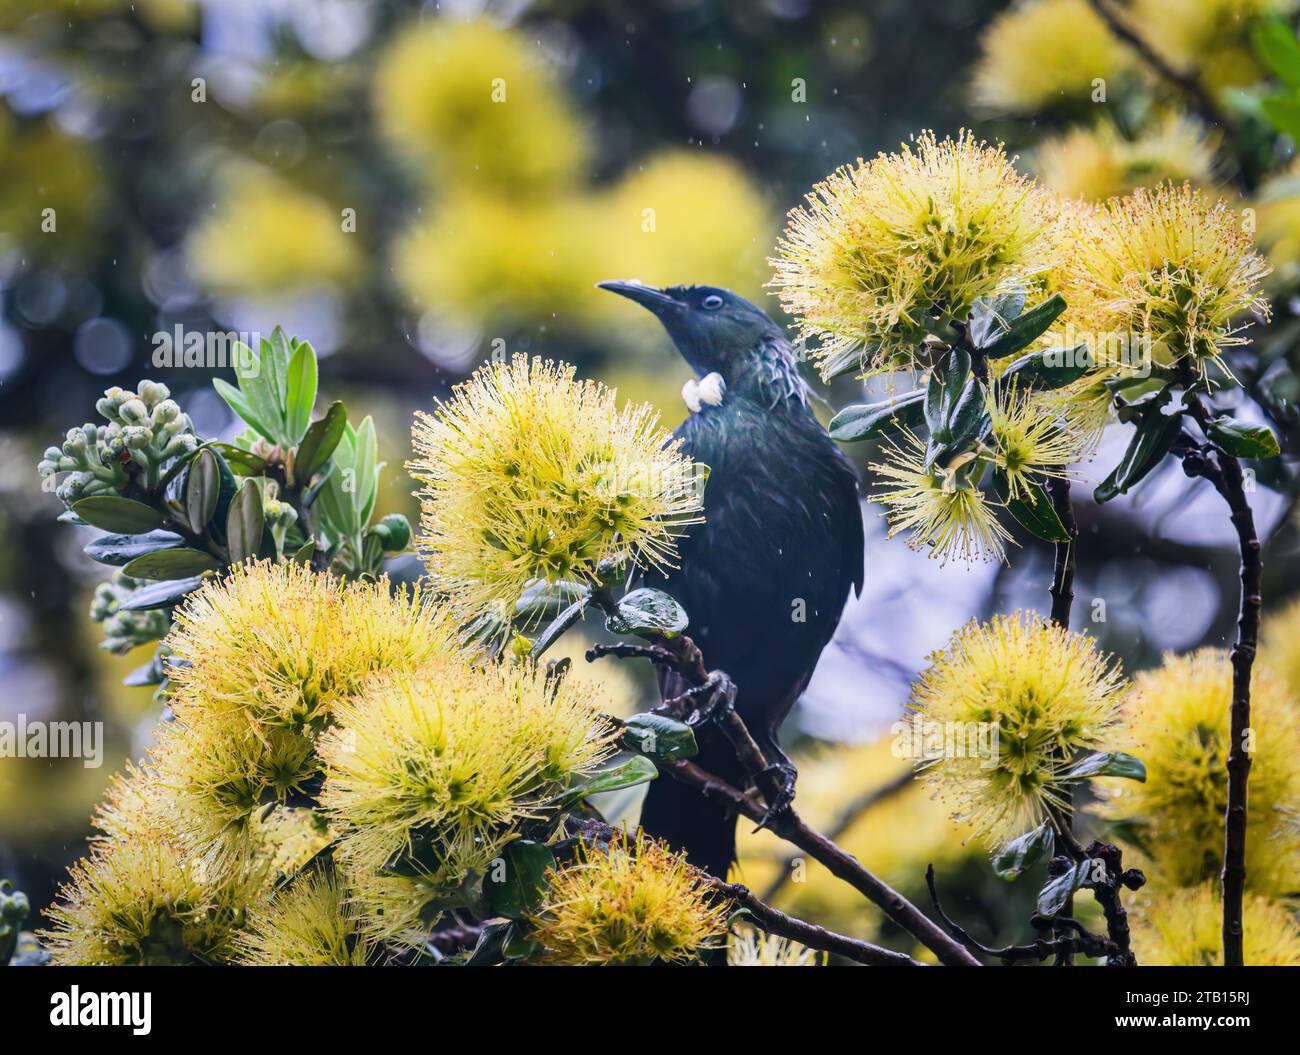 Tui bird perched on yellow Pohutukawa flowers in the rain. Auckland. Stock Photo